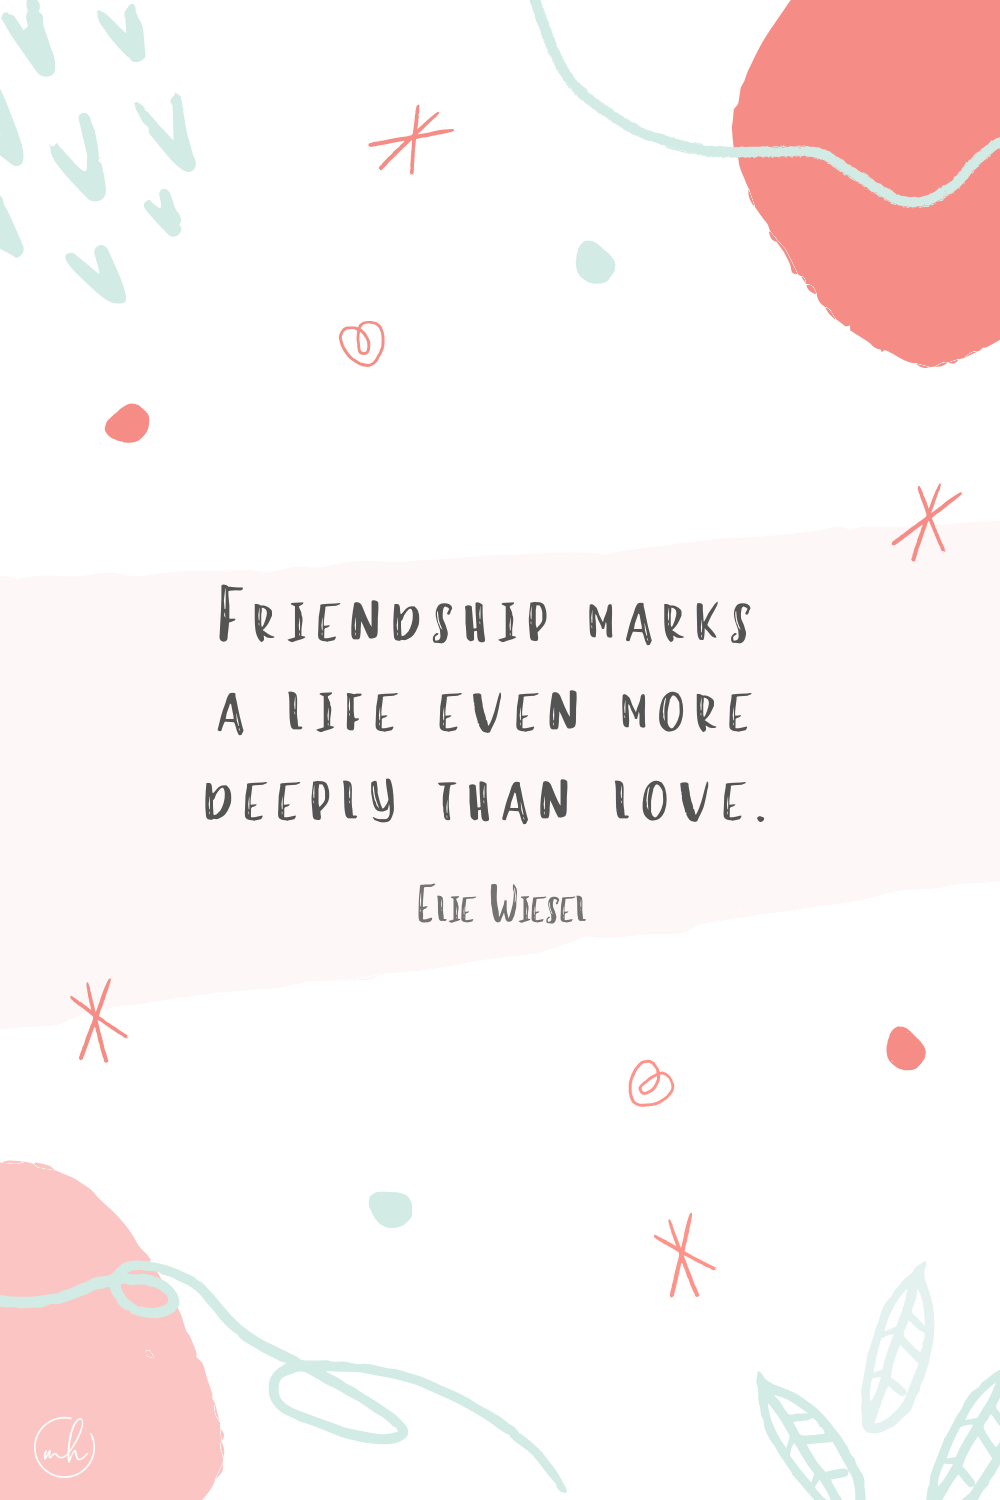 “Friendship marks a life even more deeply than love.” - Elie Wiesel